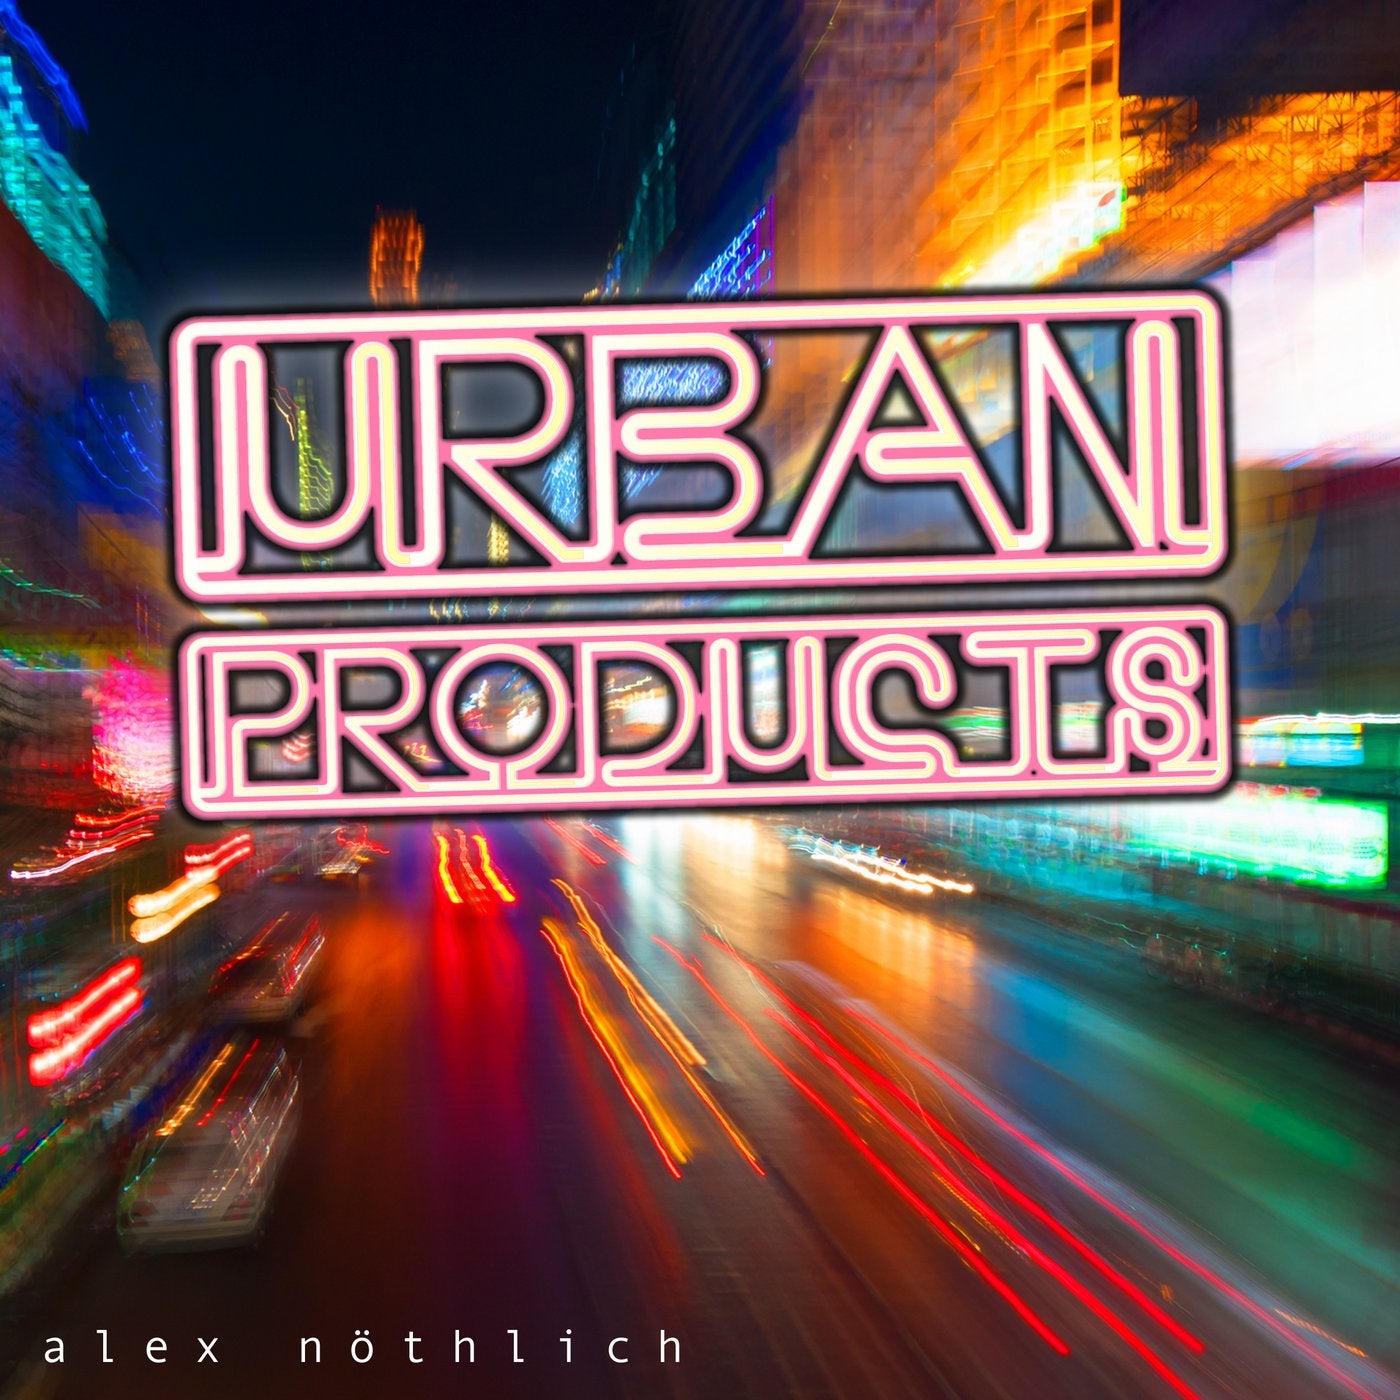 Urban Products